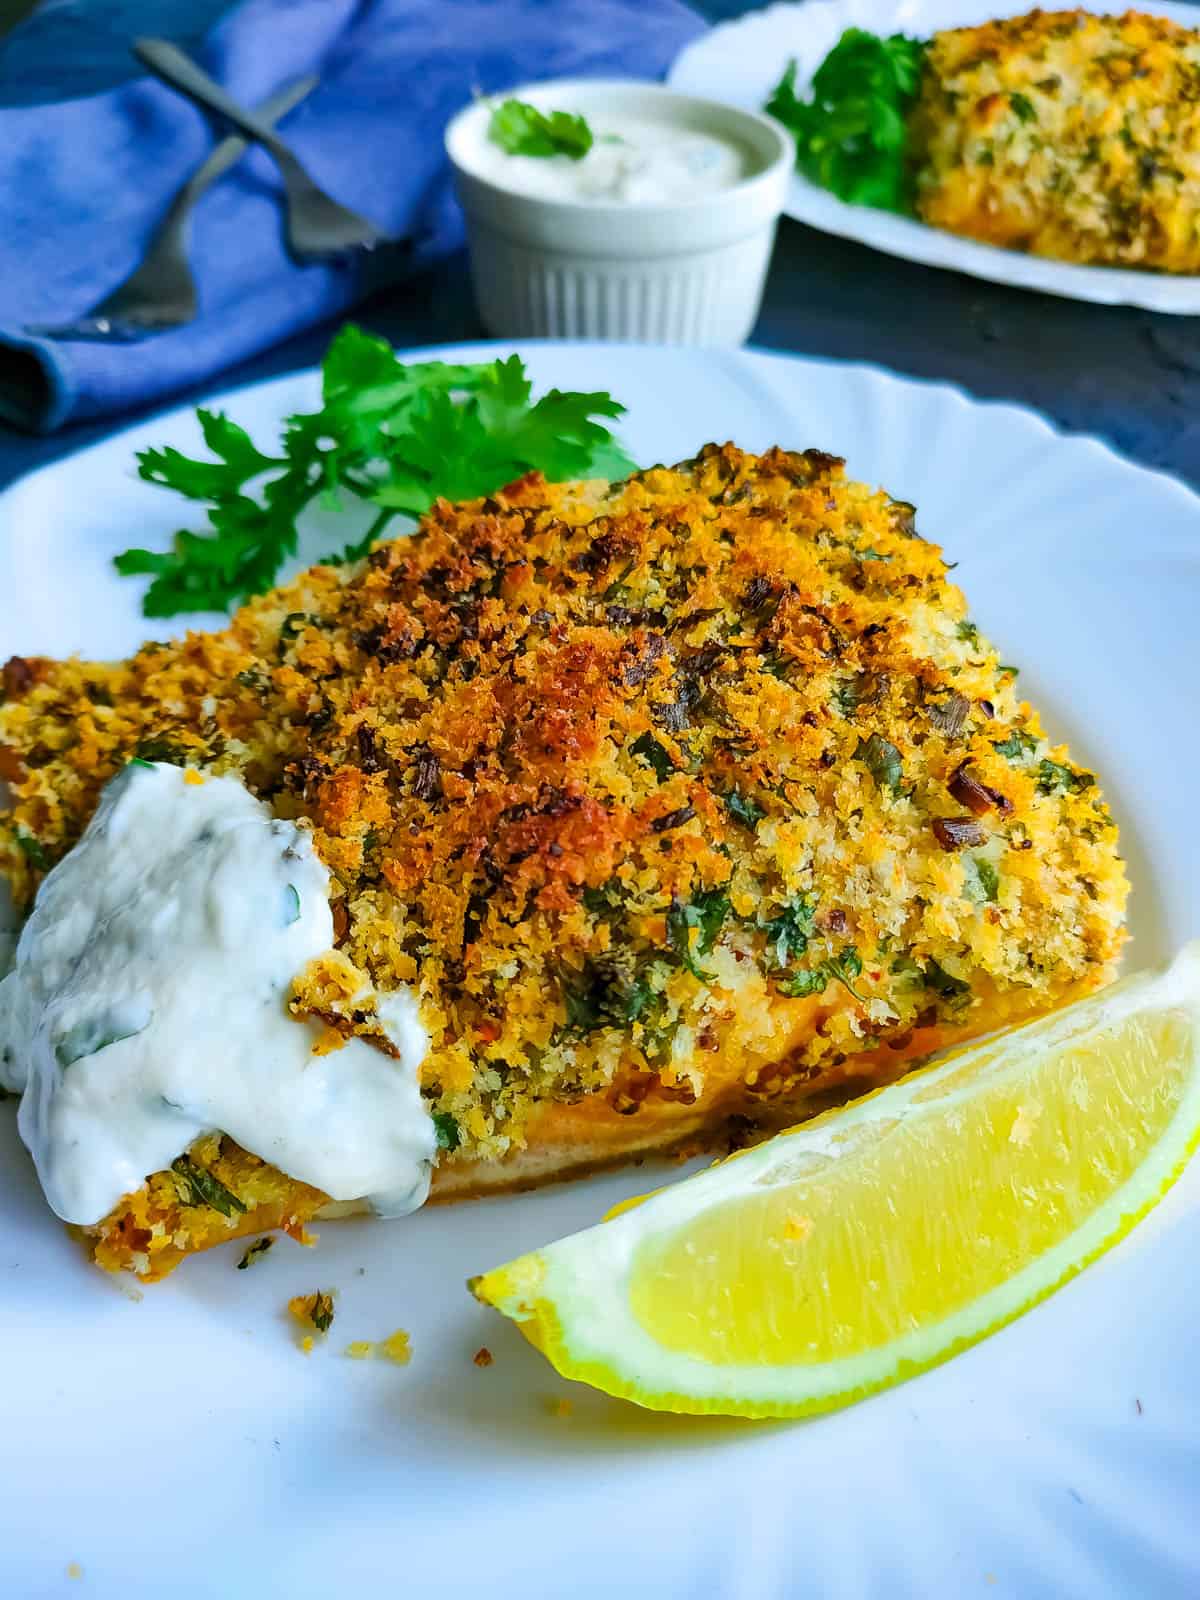 Panko crusted baked cod with yogurt sauce and garnished with parsley and lemon slices in a white plate.